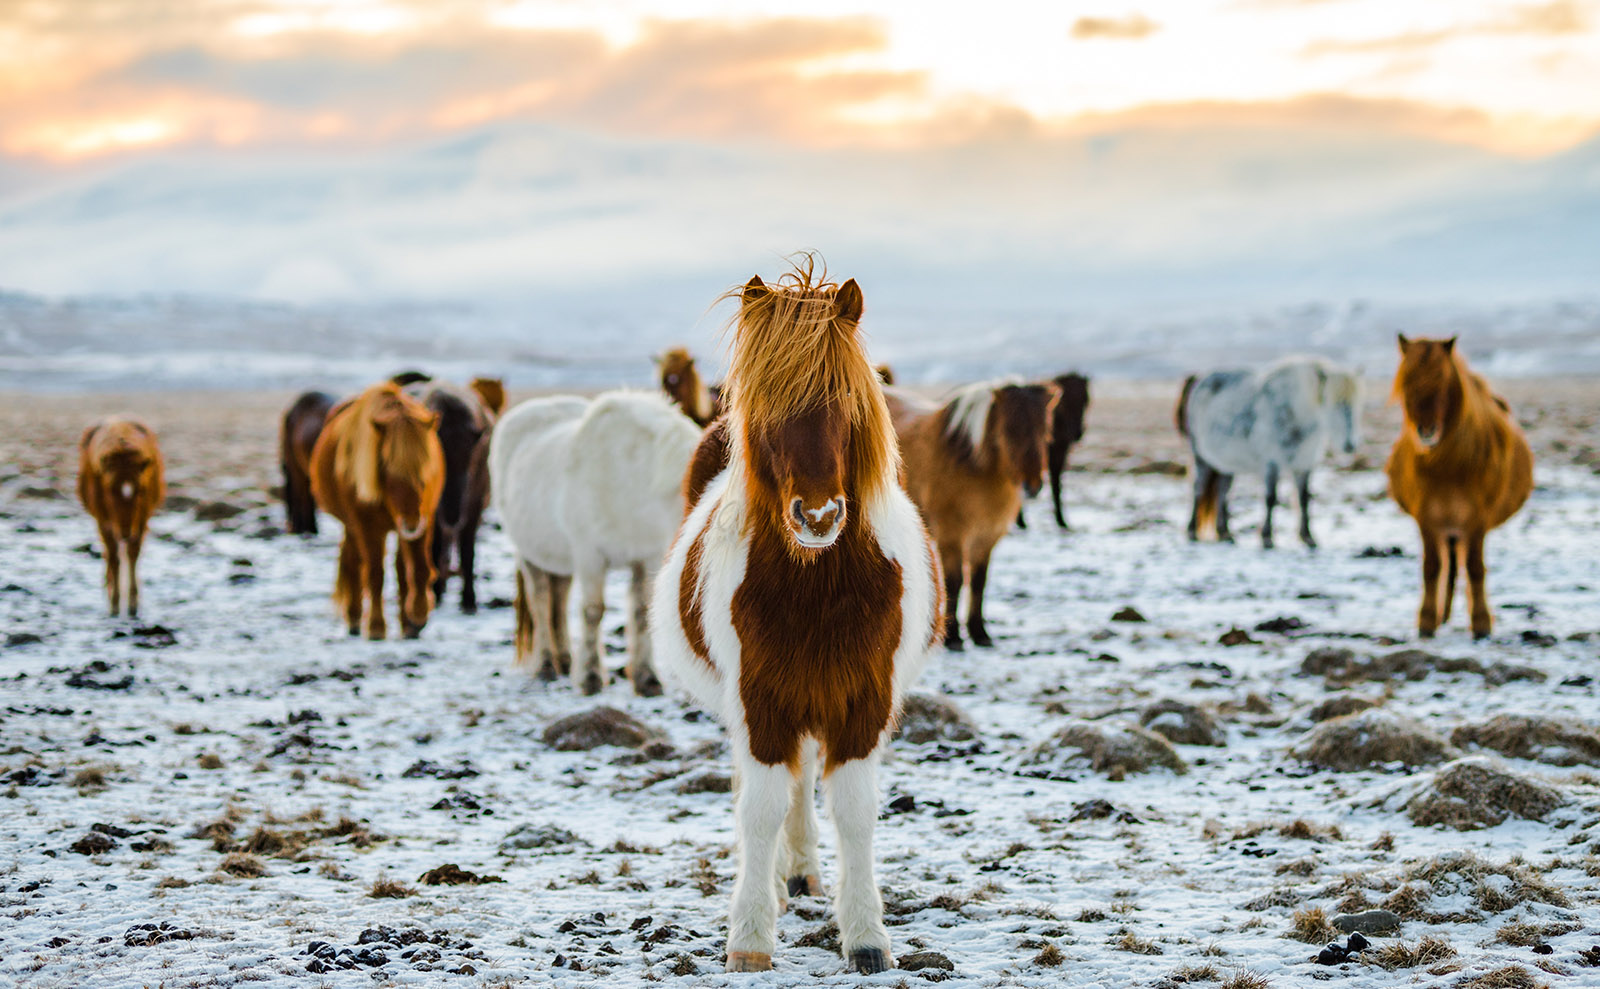 Icelandic Horses, Best Food Books, Literary London, New Scrooge & More: Endnotes 04 December